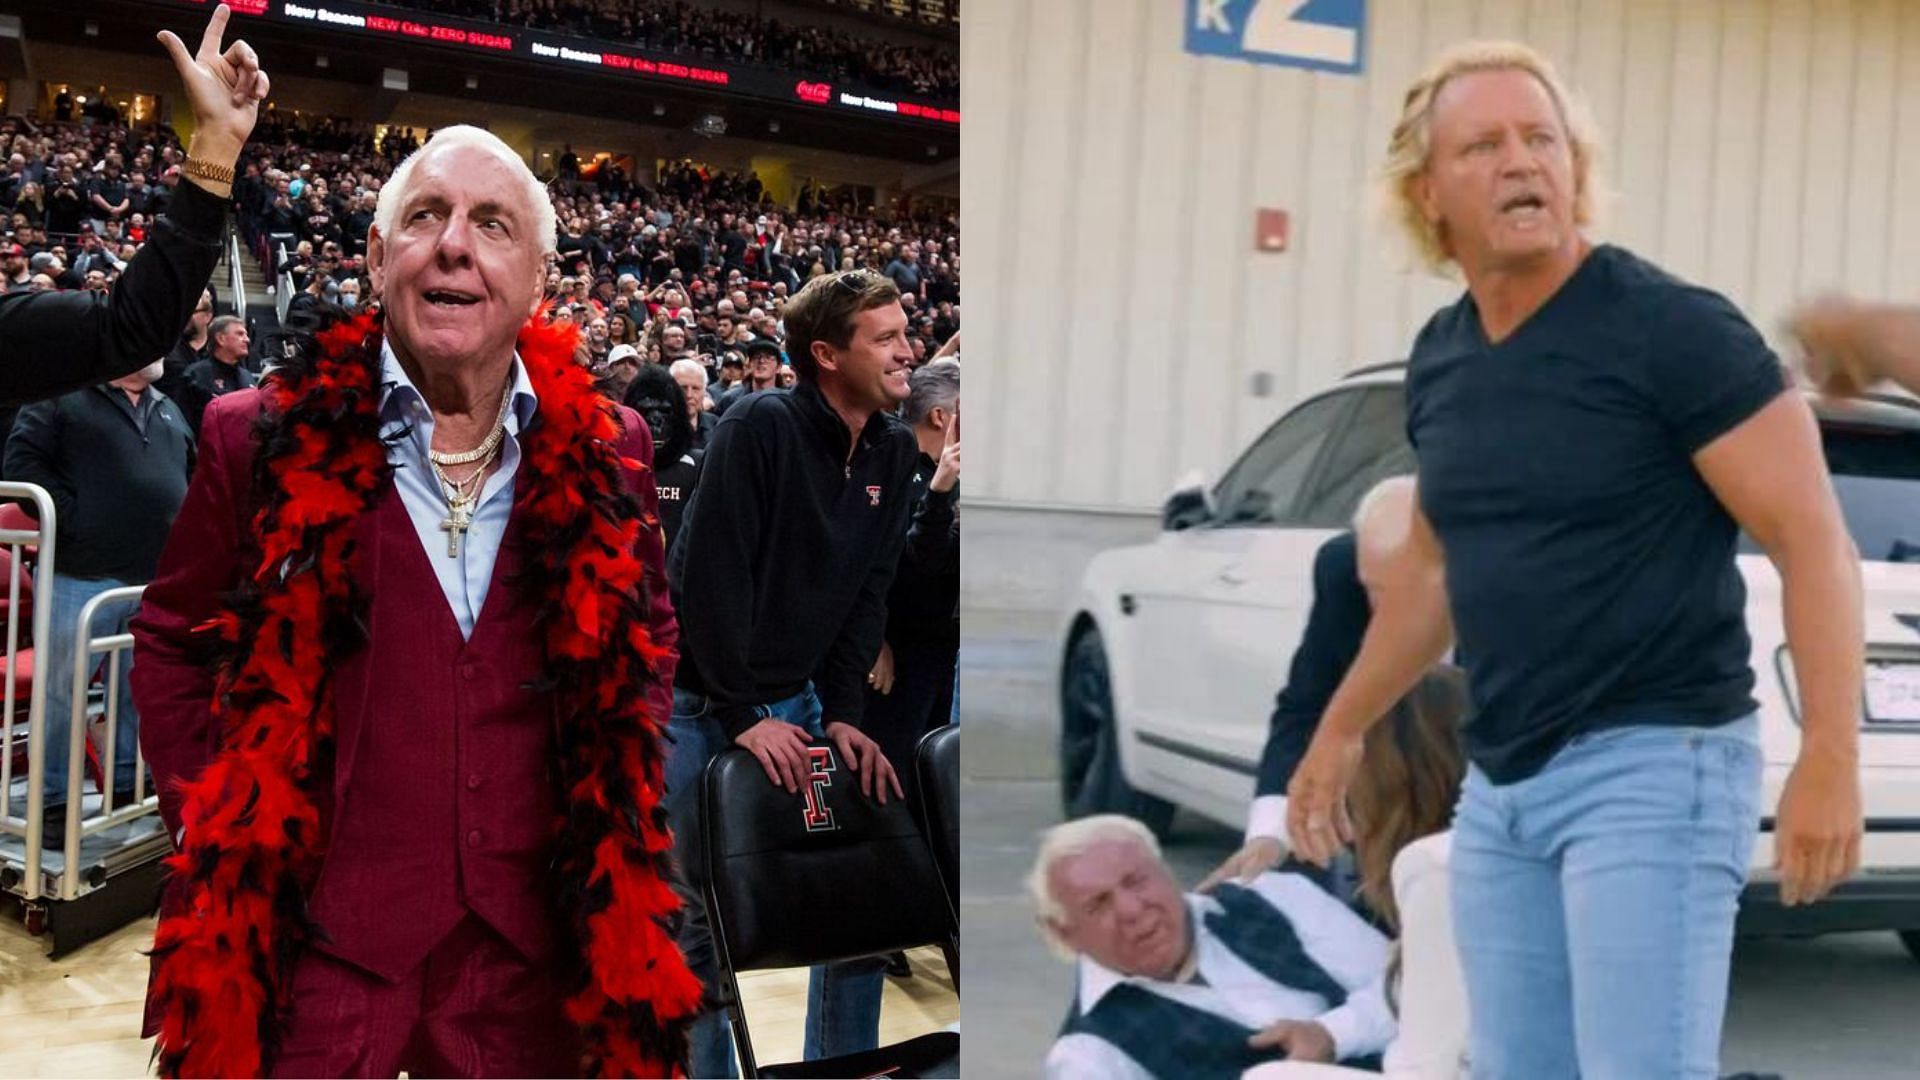 The Nature Boy will compete in his final match later this month